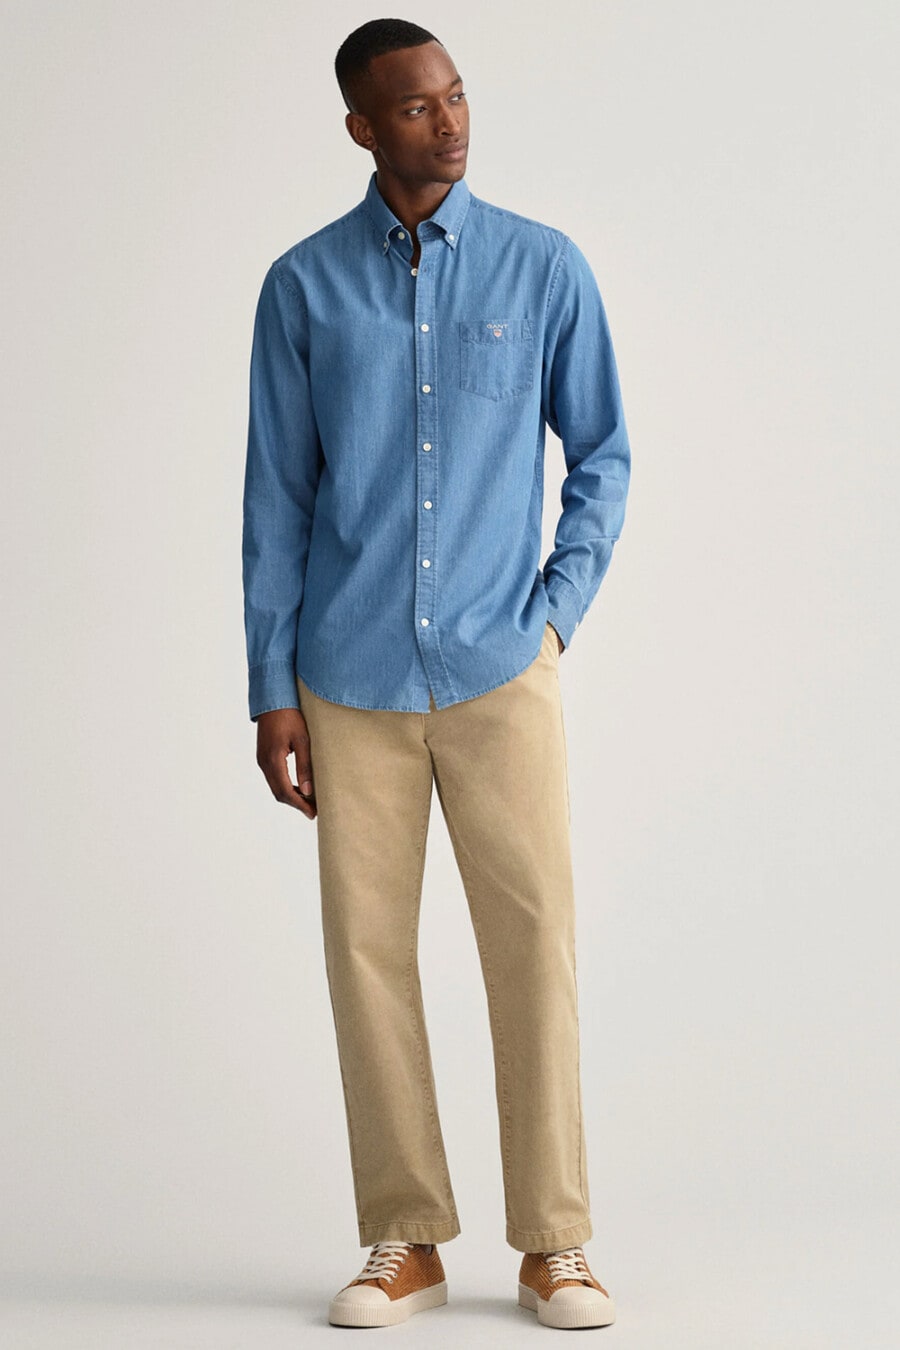 Men's khaki pants, blue Oxford shirt and brown canvas sneakers outfit